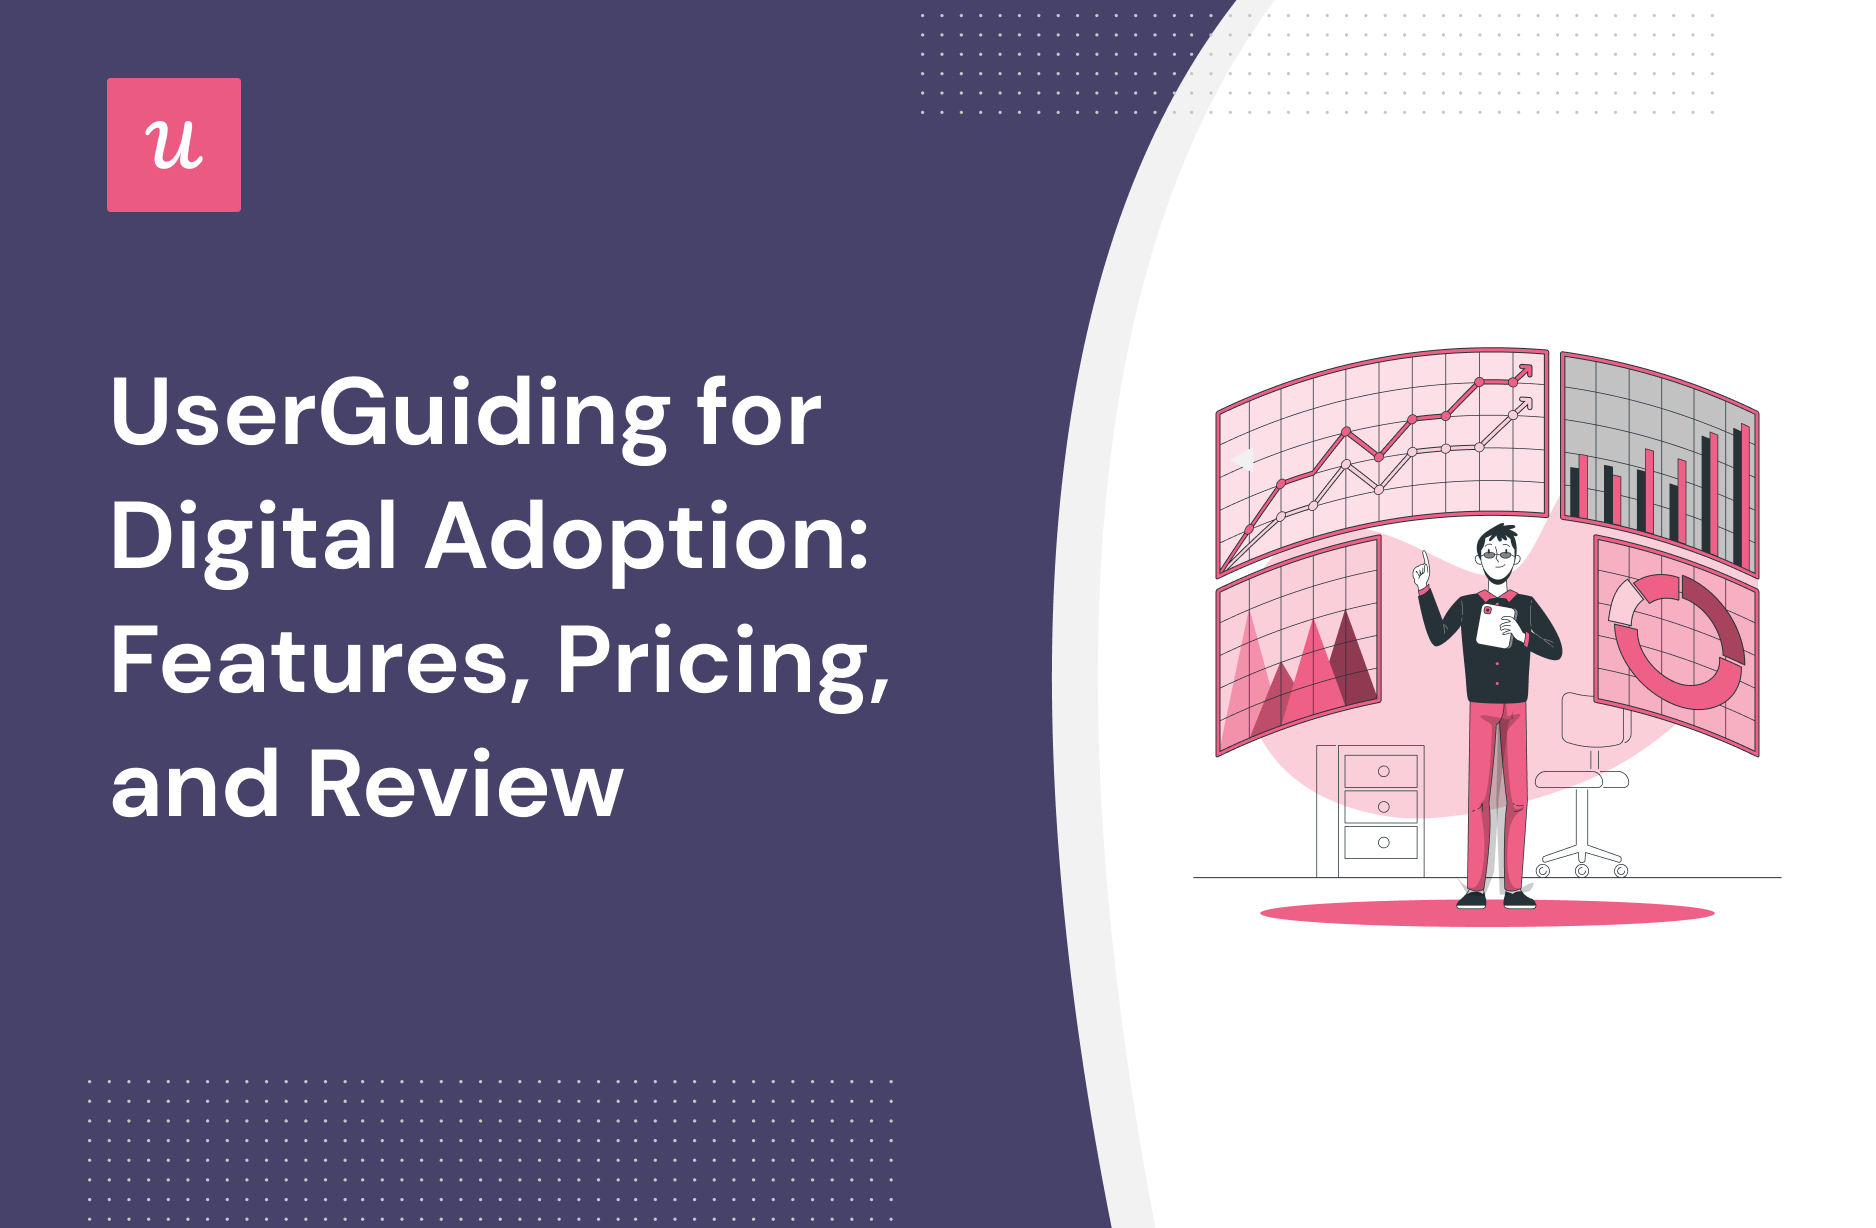 UserGuiding for Digital Adoption: Features, Pricing, and Review